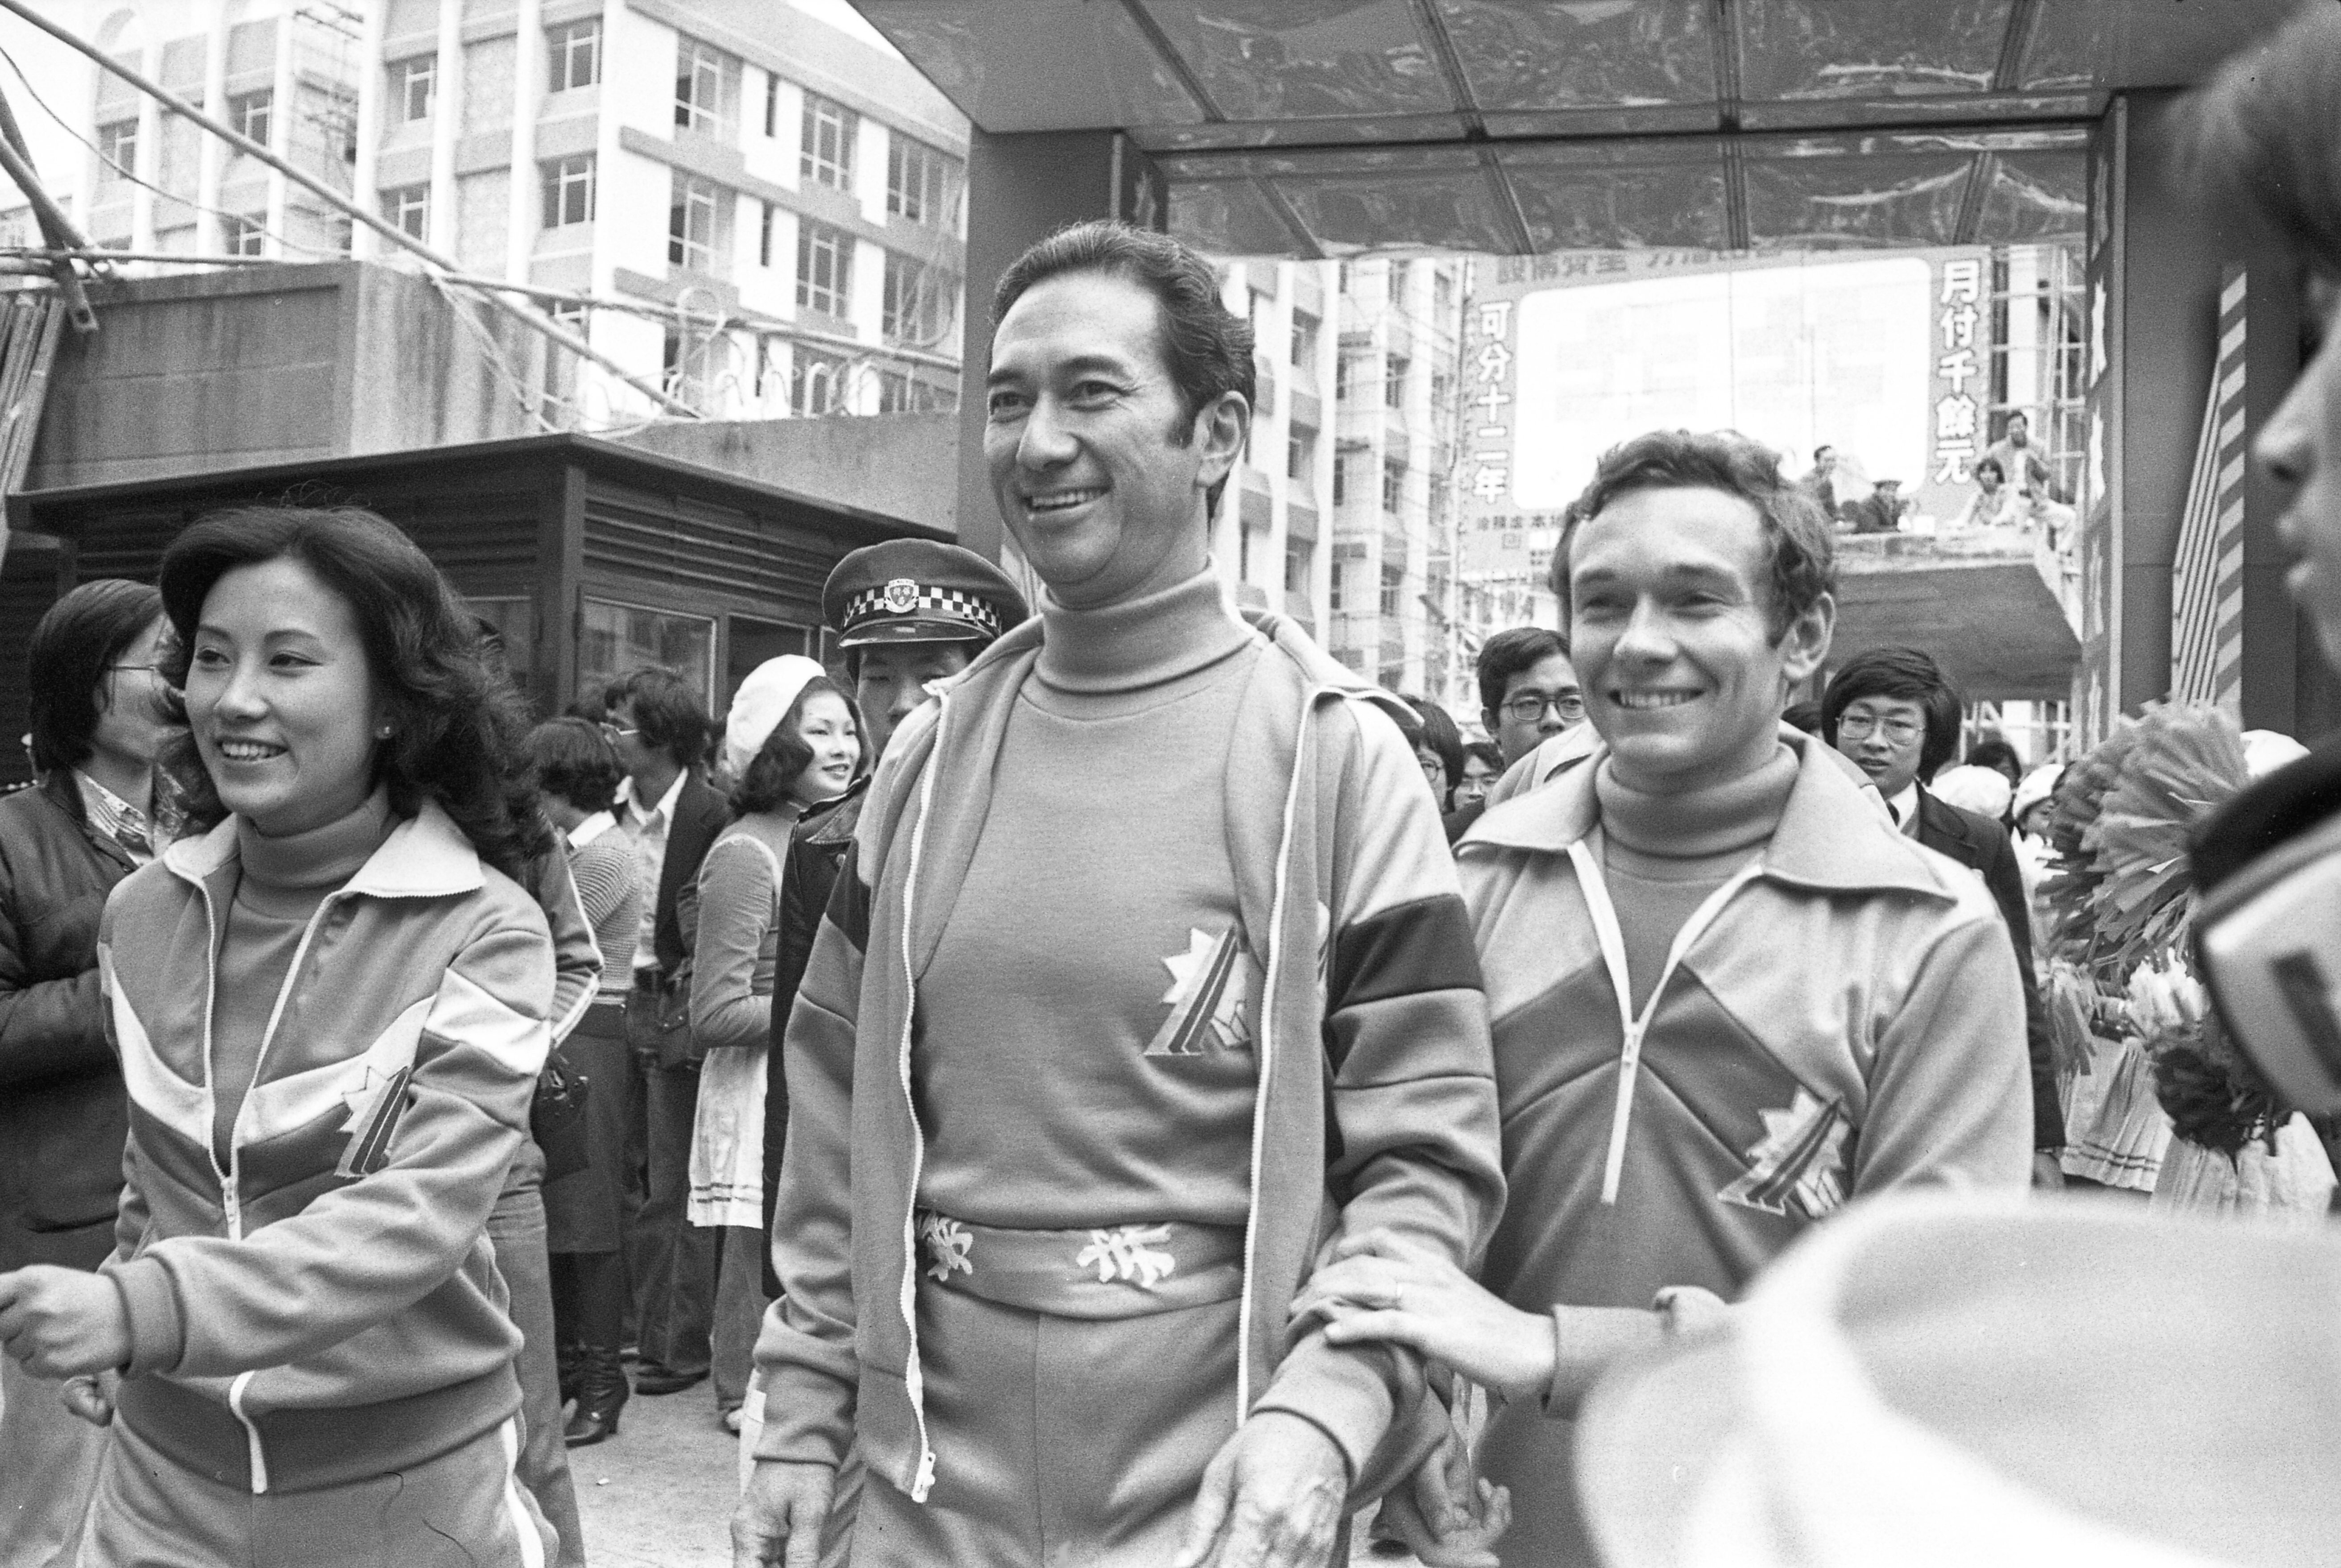 Stanley Ho, centre, and other celebrities are welcomed by cheerleaders and photographers at the finishing point of the Celebrity Relay Walkathon, a fund-raising event for the Community Chest, at the TVB headquarters in Hong Kong on January 29, 1978. Photo: SCMP